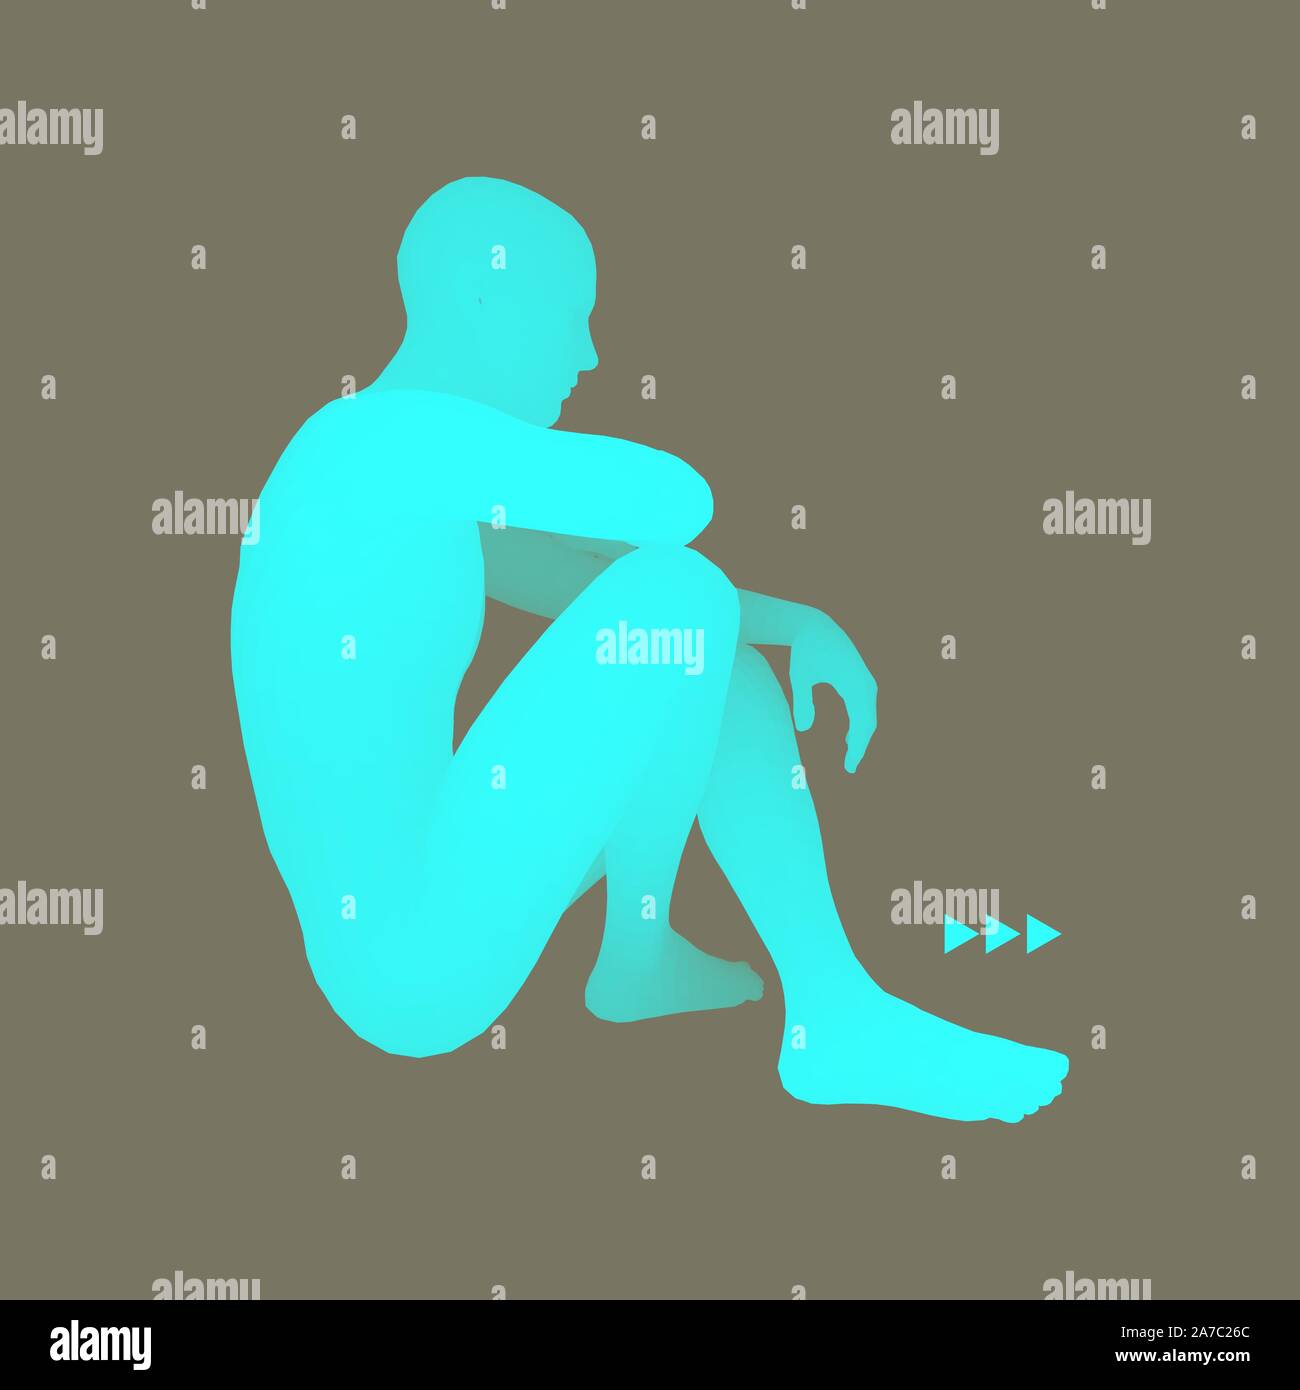 Man in a Thinker Pose. 3D Model of Man. Business, Science, Psychology or Philosophy Vector Illustration. Stock Vector